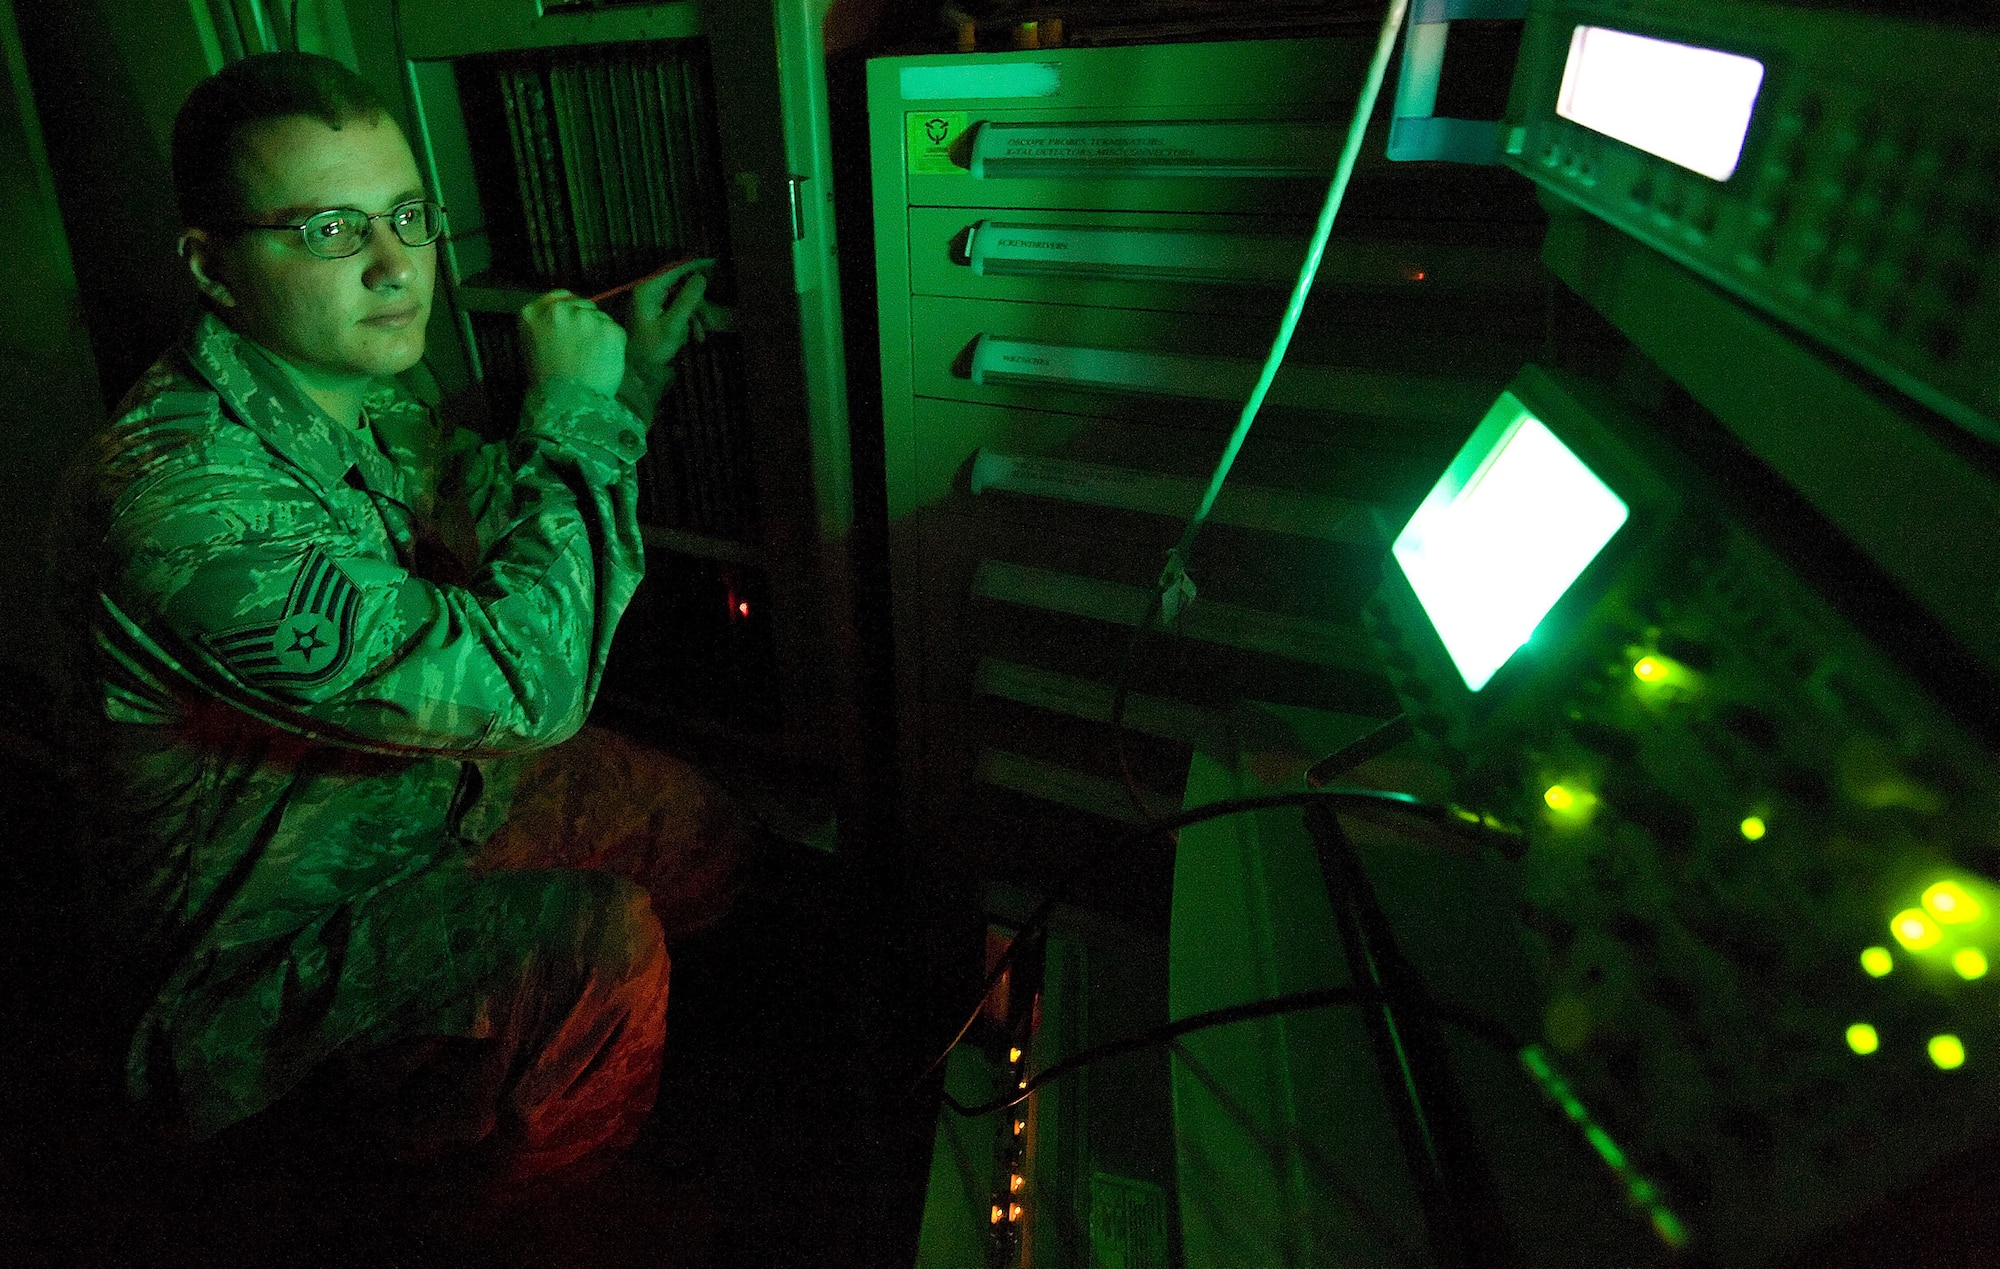 Staff Sgt. Josh Wilfong, 436th Communications Squadron ground radar systems technician, keeps an eye on the oscilloscope, which displays electronic video signals, as he adjusts the signal strength inside the surveillance radar?s processor cabinet. It is important to adjust the signal strength to give the air traffic controllers a clear display of all air traffic above Dover Air Force Base. (Air Force photo/ Jason Minto)